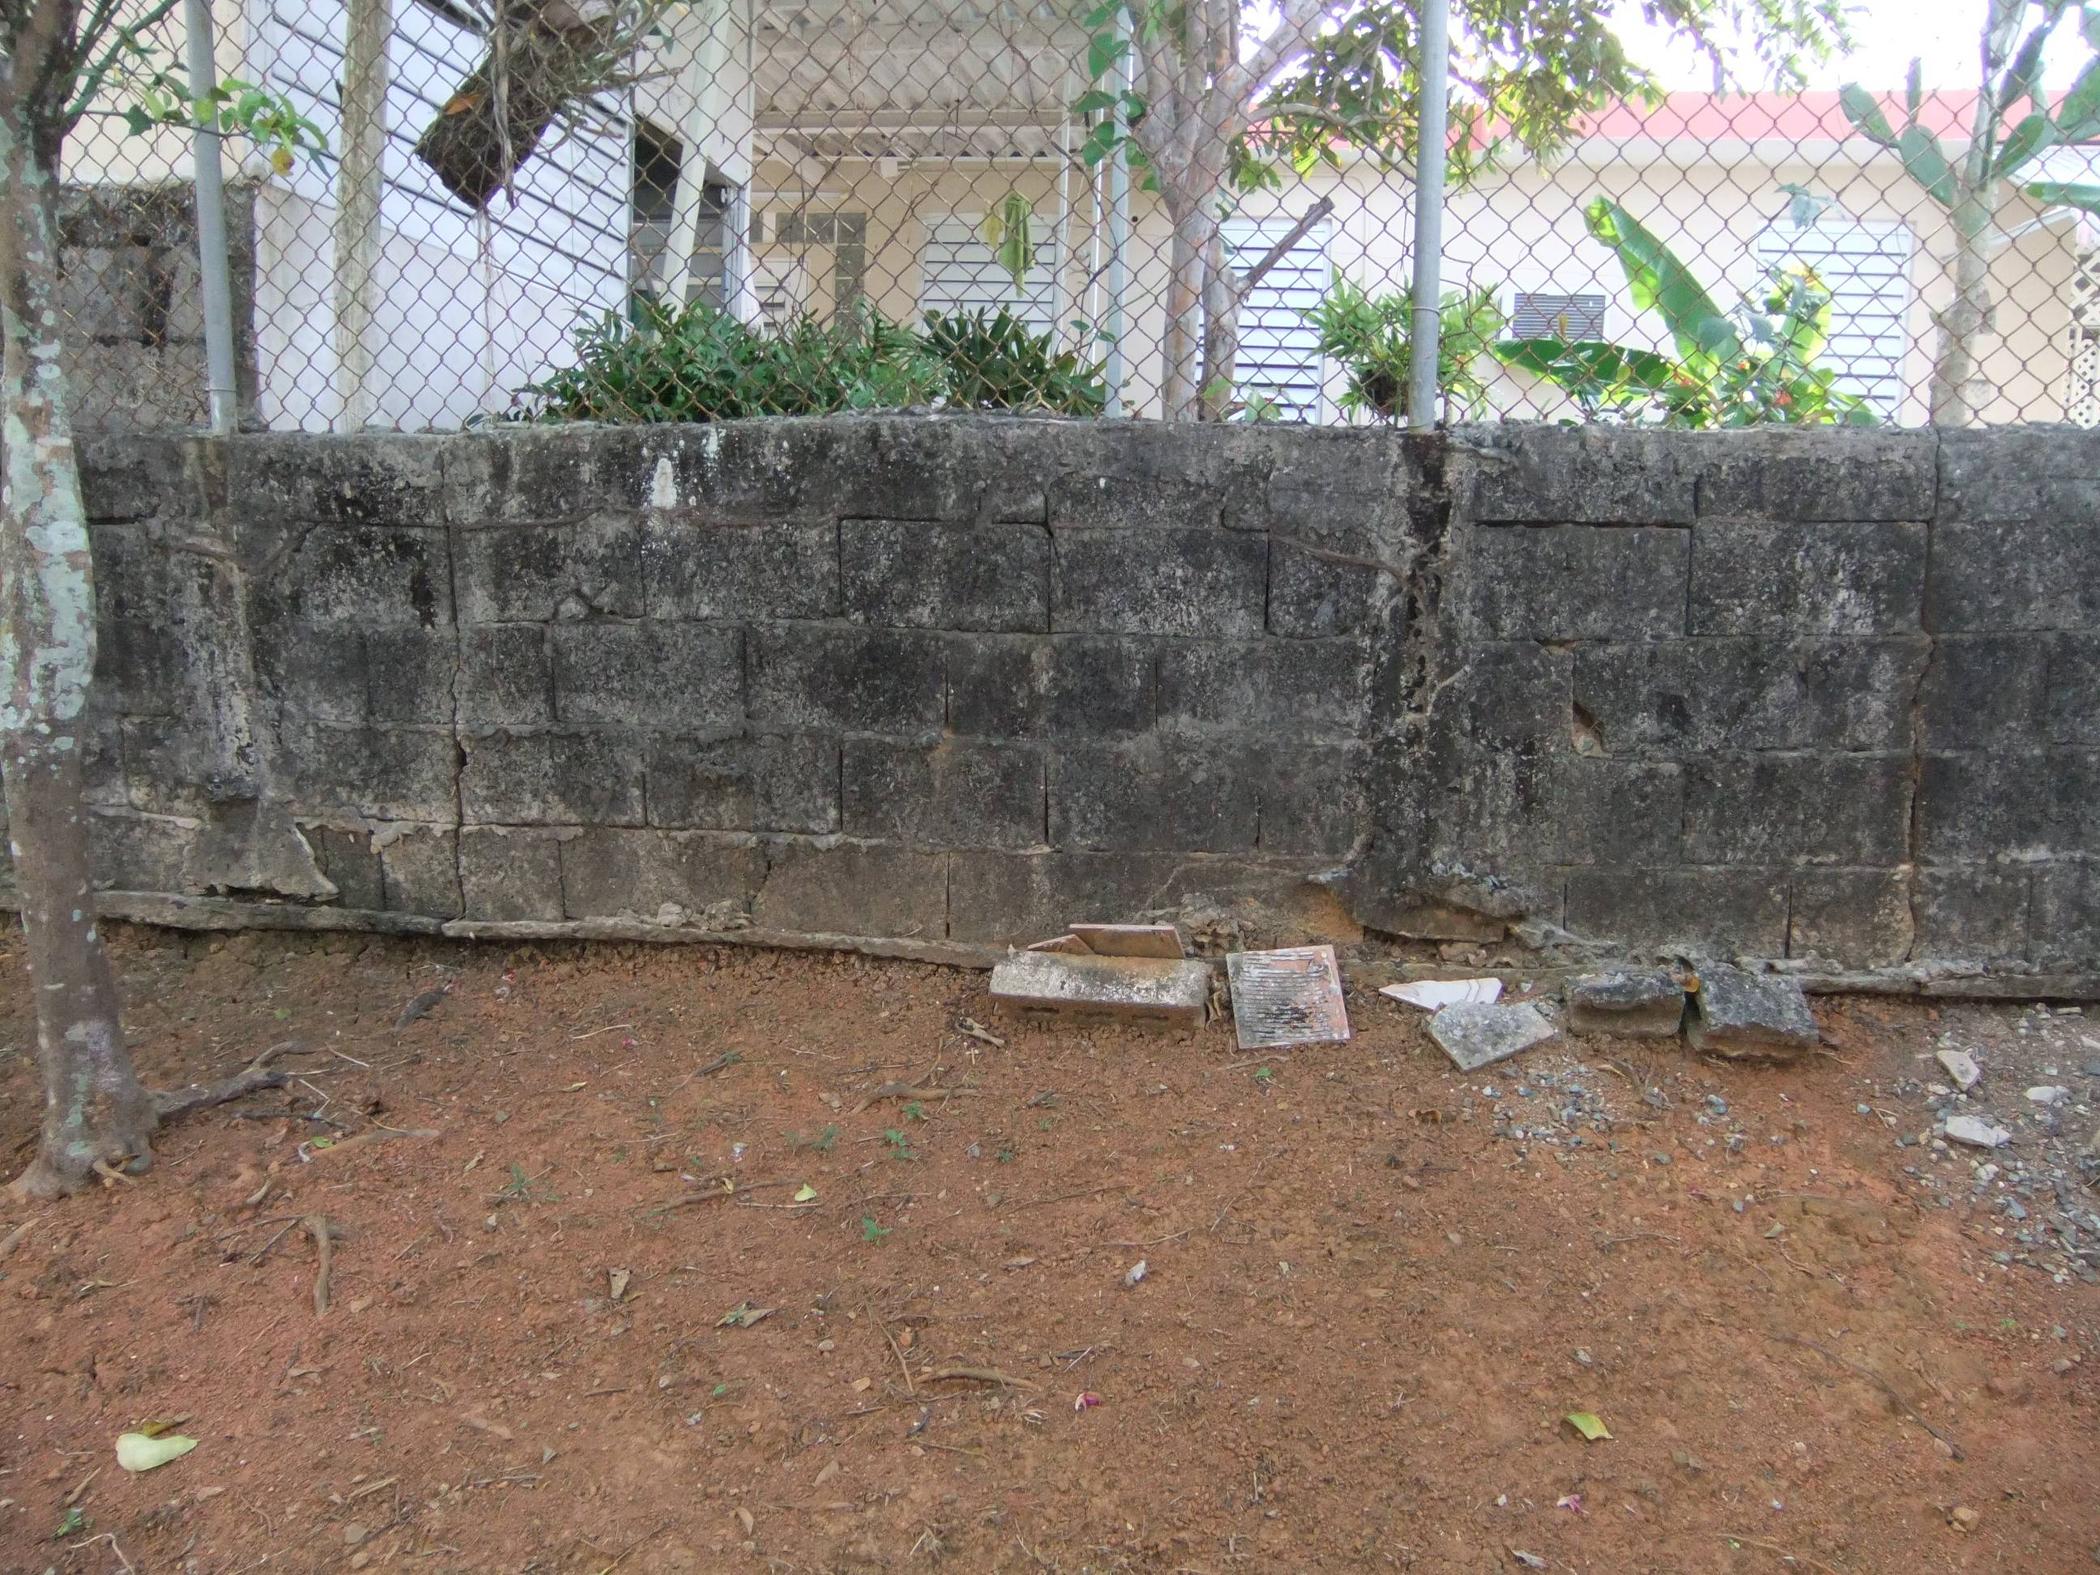 How can I prevent this concrete block wall from falling over? - Home ...